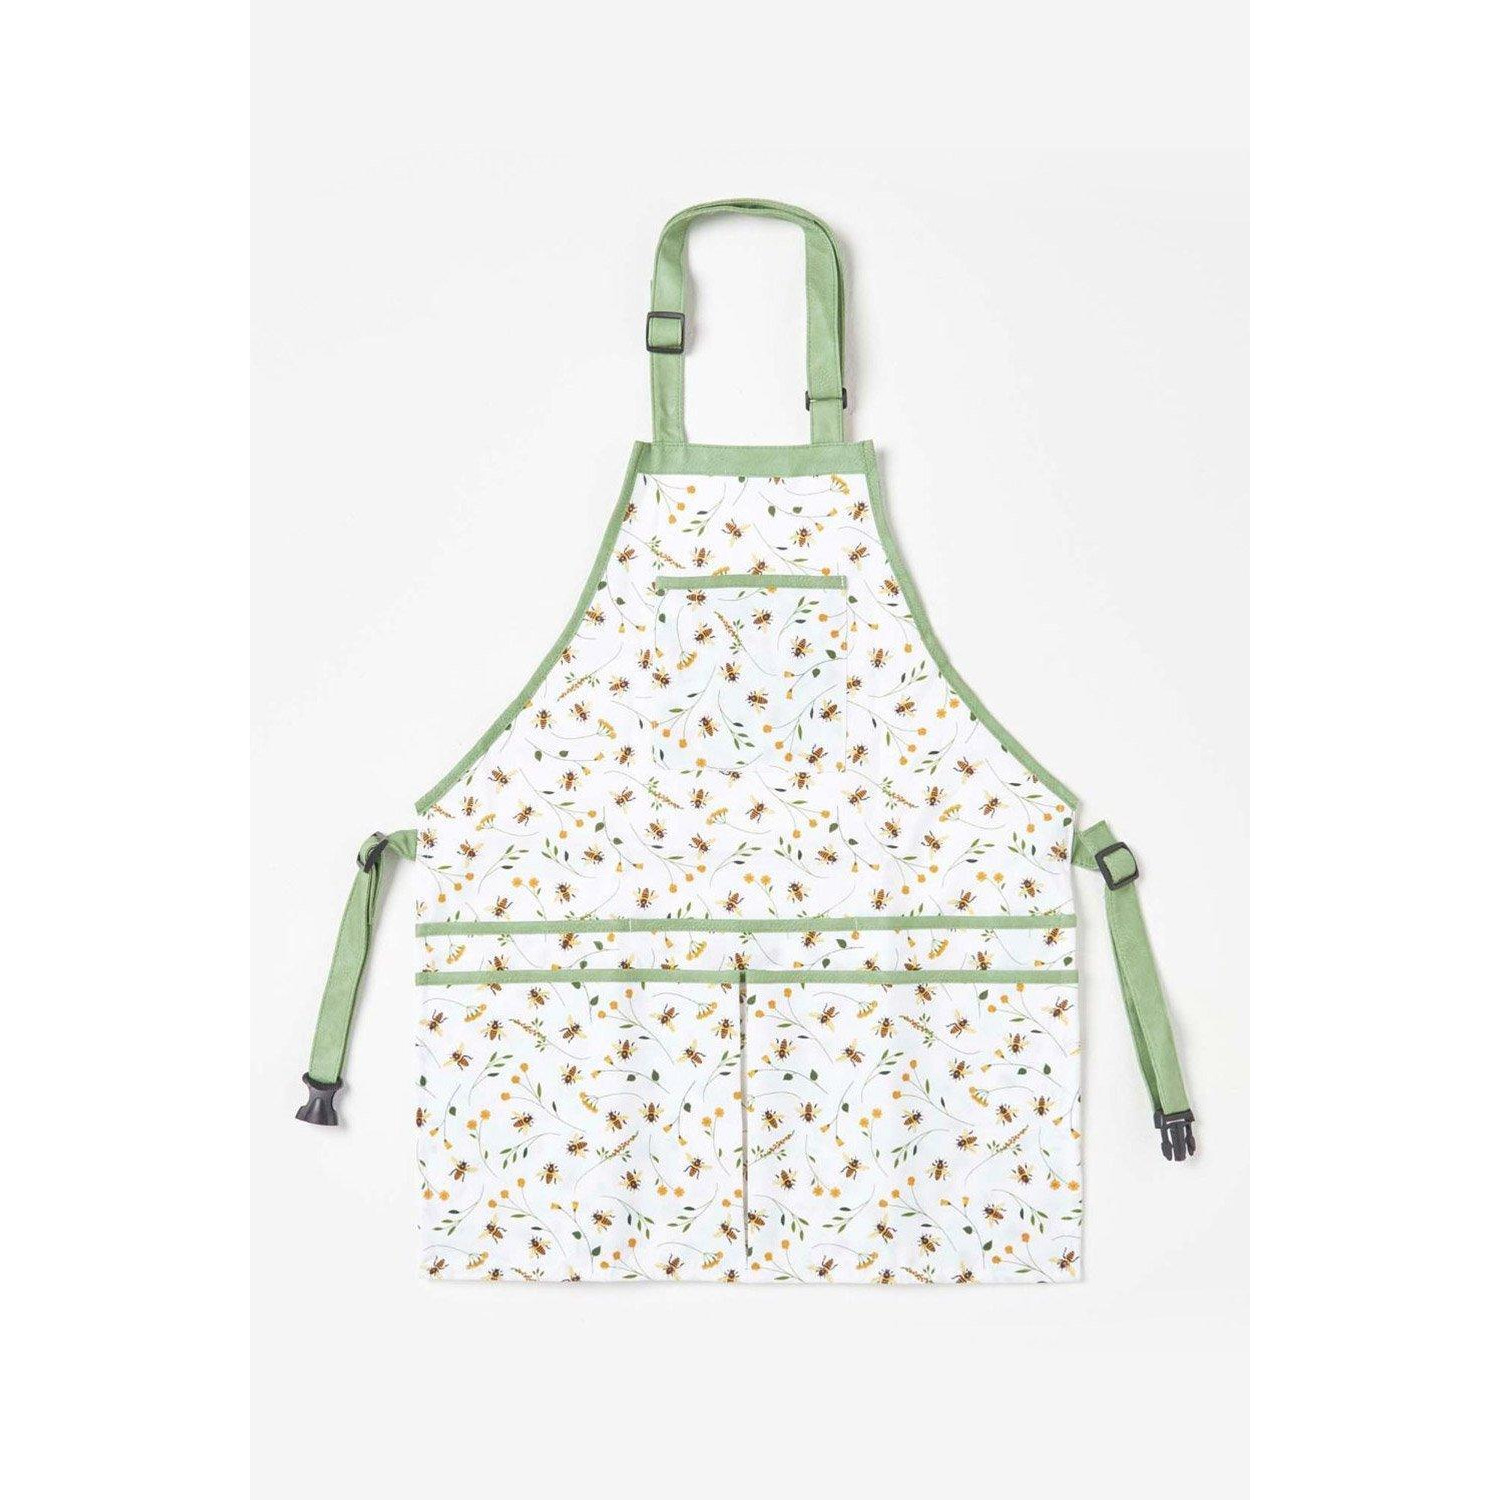 Gardening Apron with Floral Bee Design - image 1